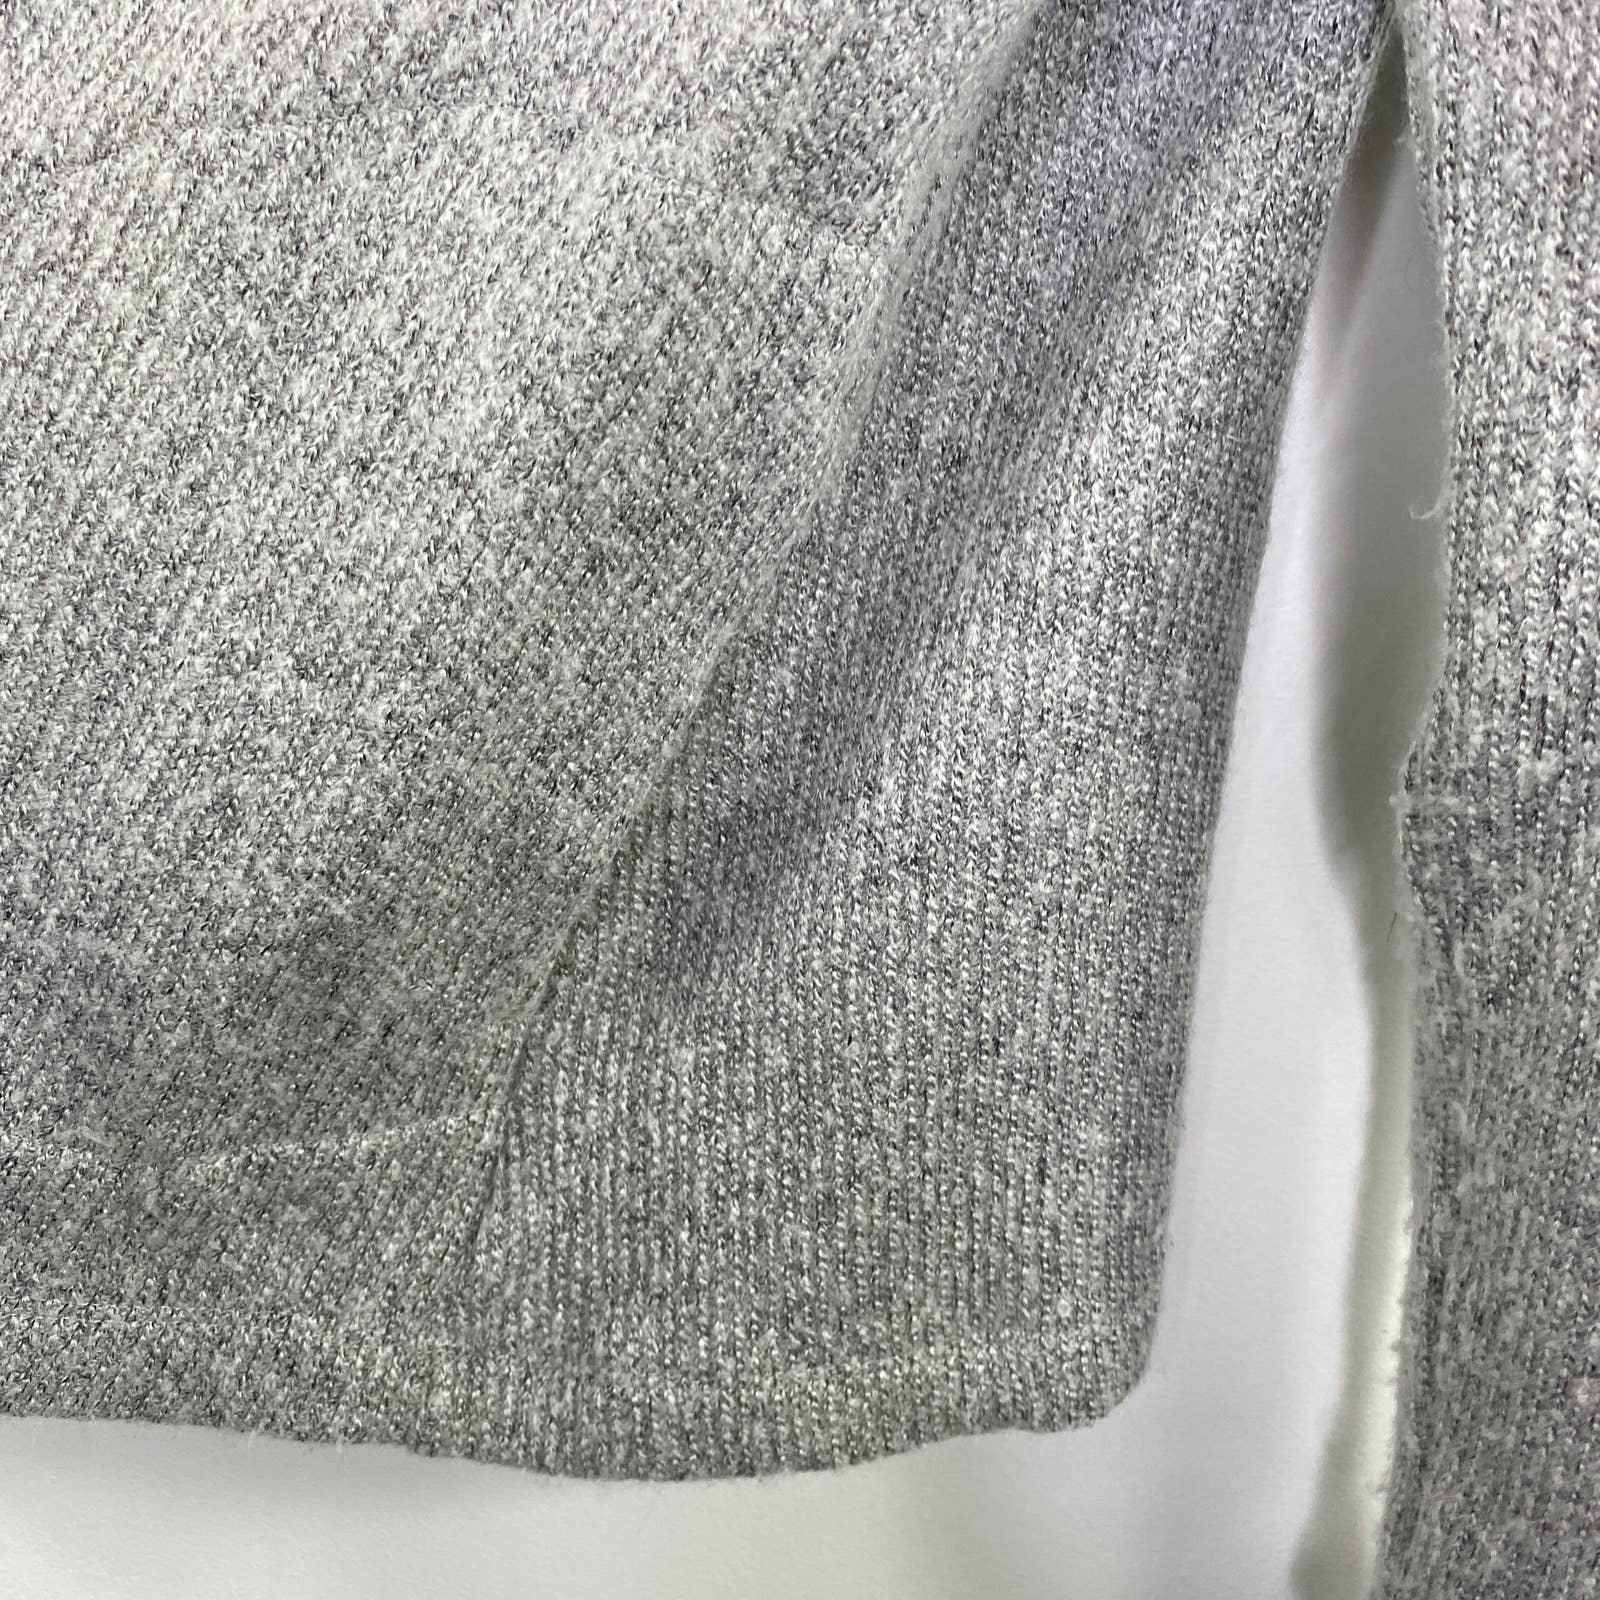 High quality Loft Gray Open Front Knit Cardigan Sweater Womens Size Small S IxTmfIF6q online store